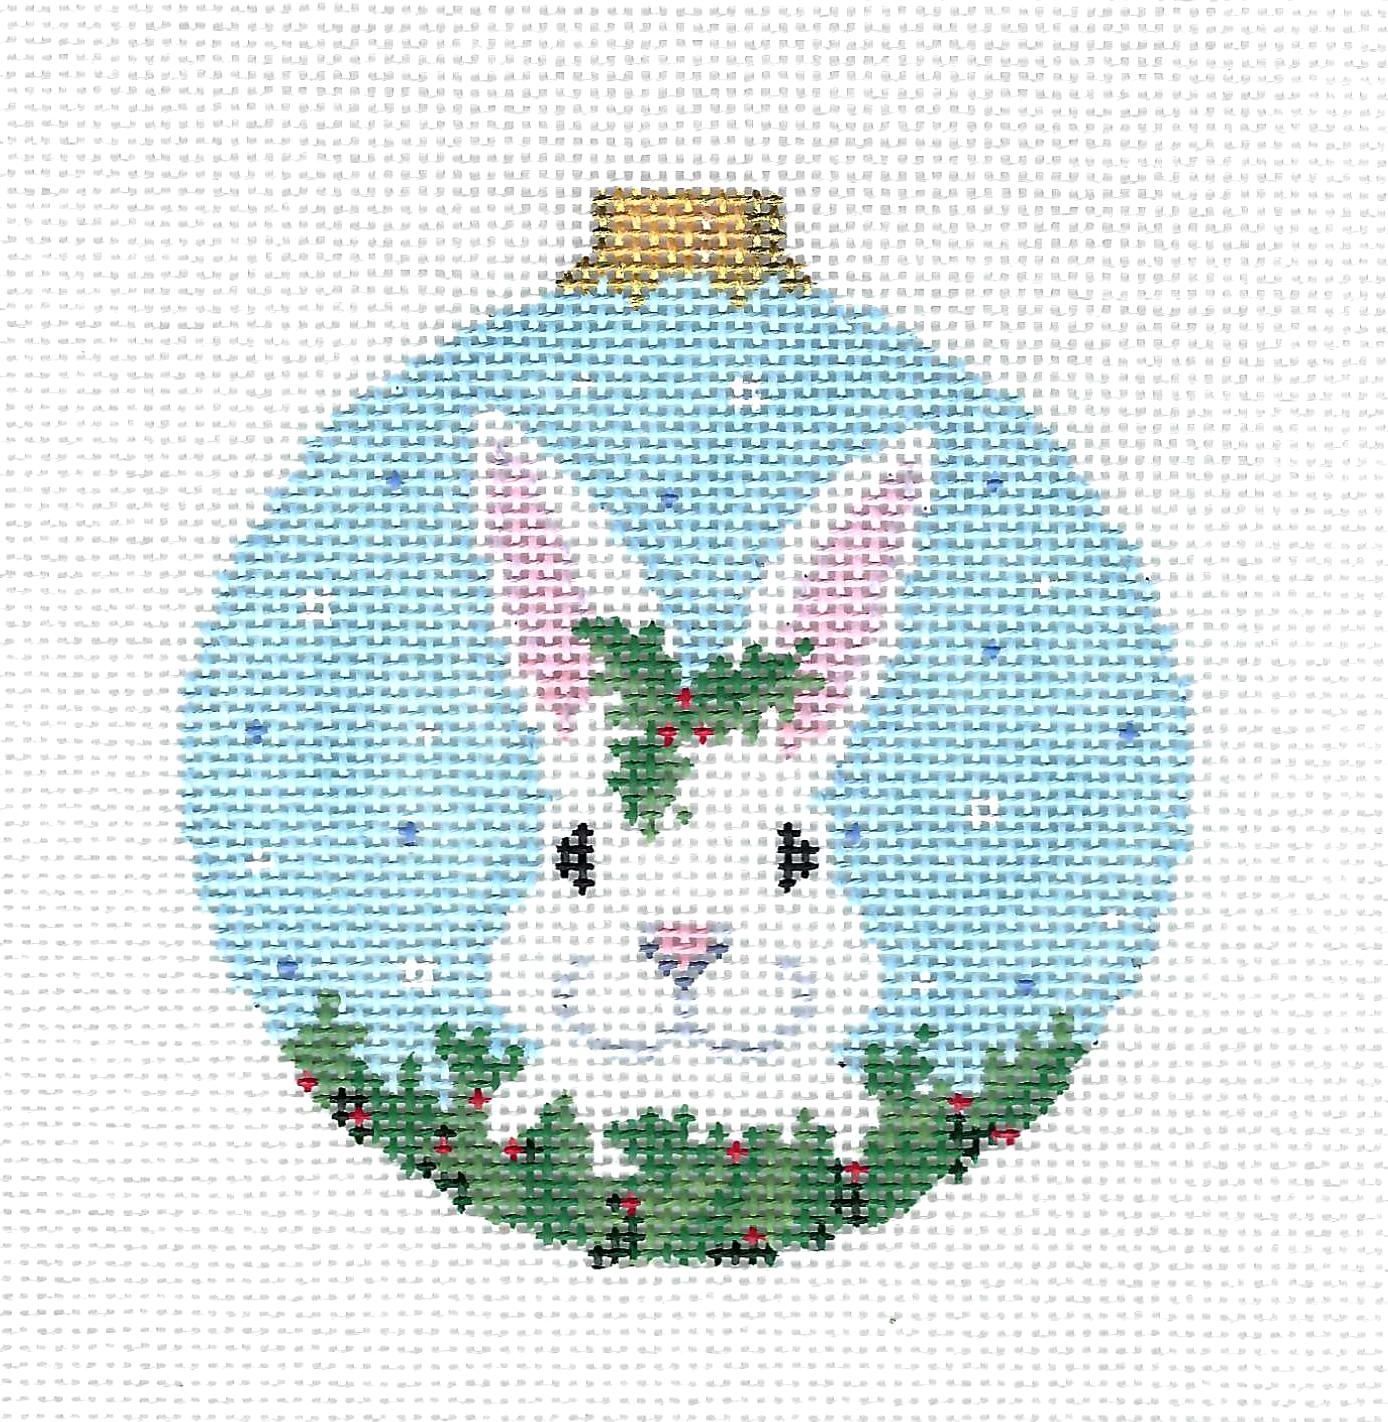 Rabbit ~ White Bunny in a Holly Bush handpainted Needlepoint Ornament by Susan Roberts